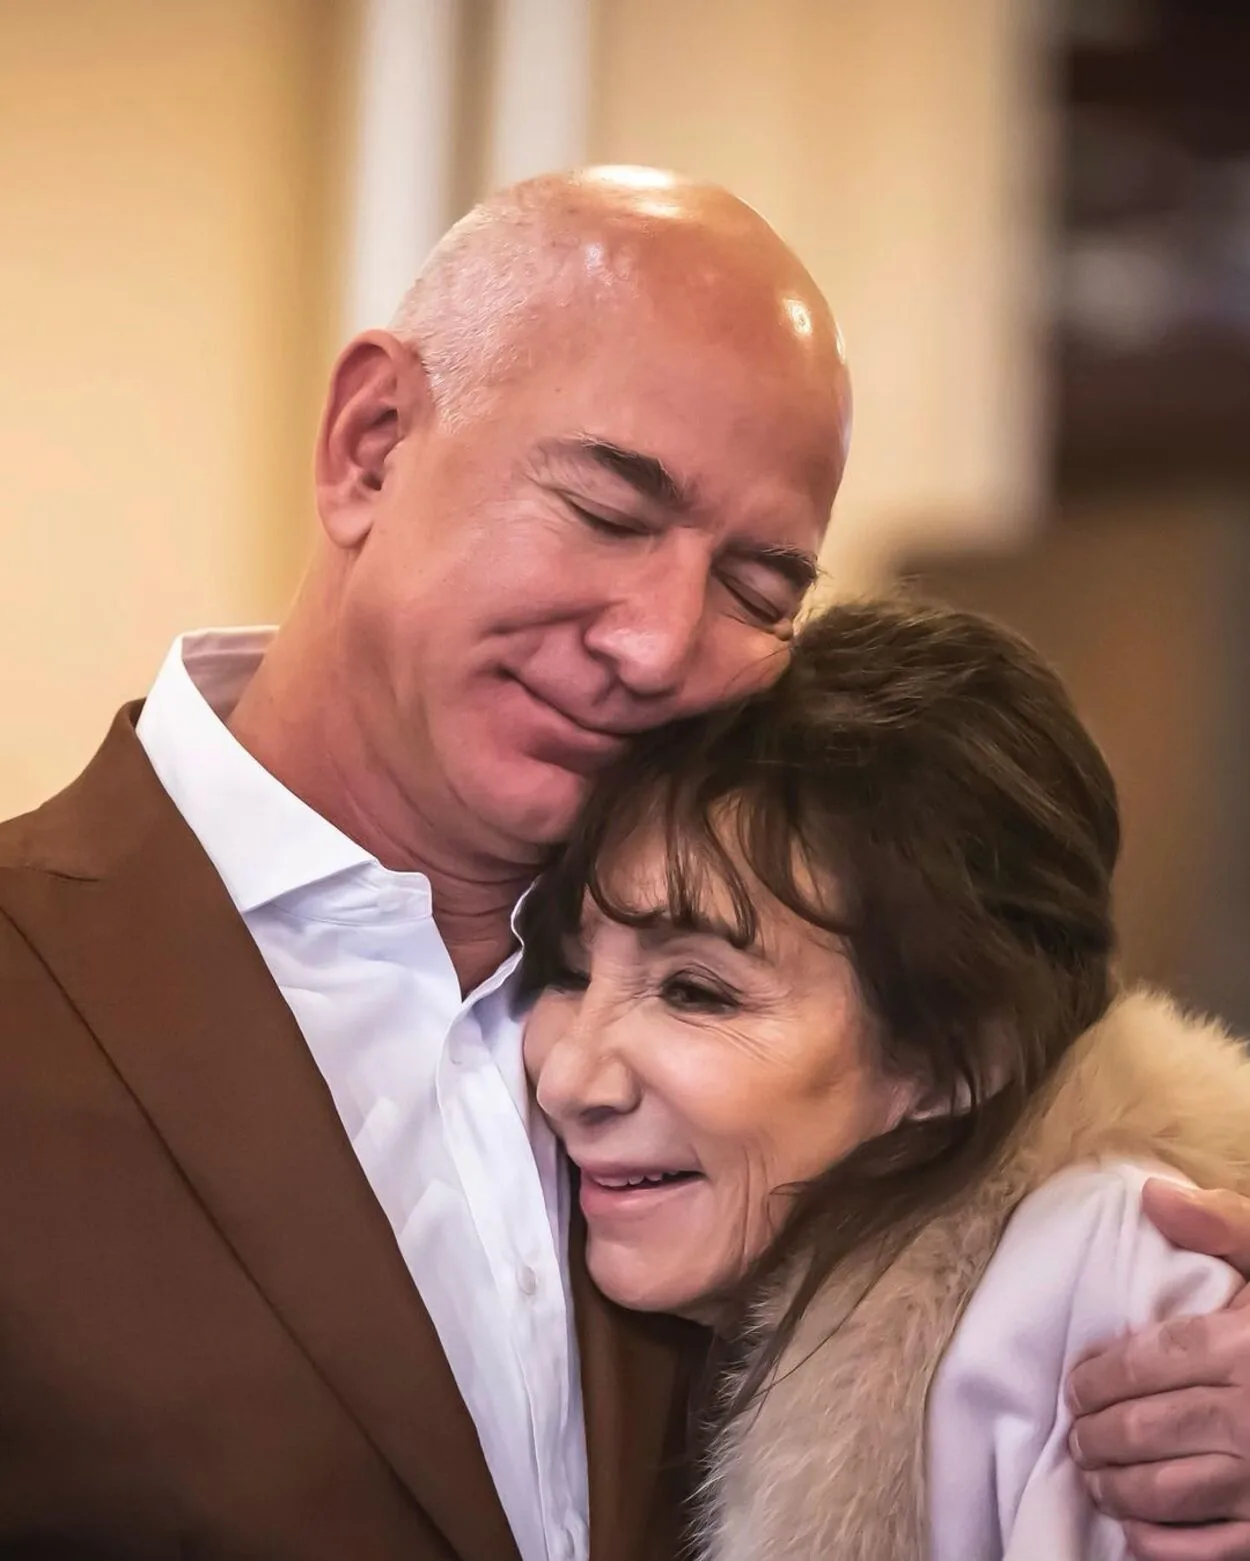 Jeff Bezos and his mother